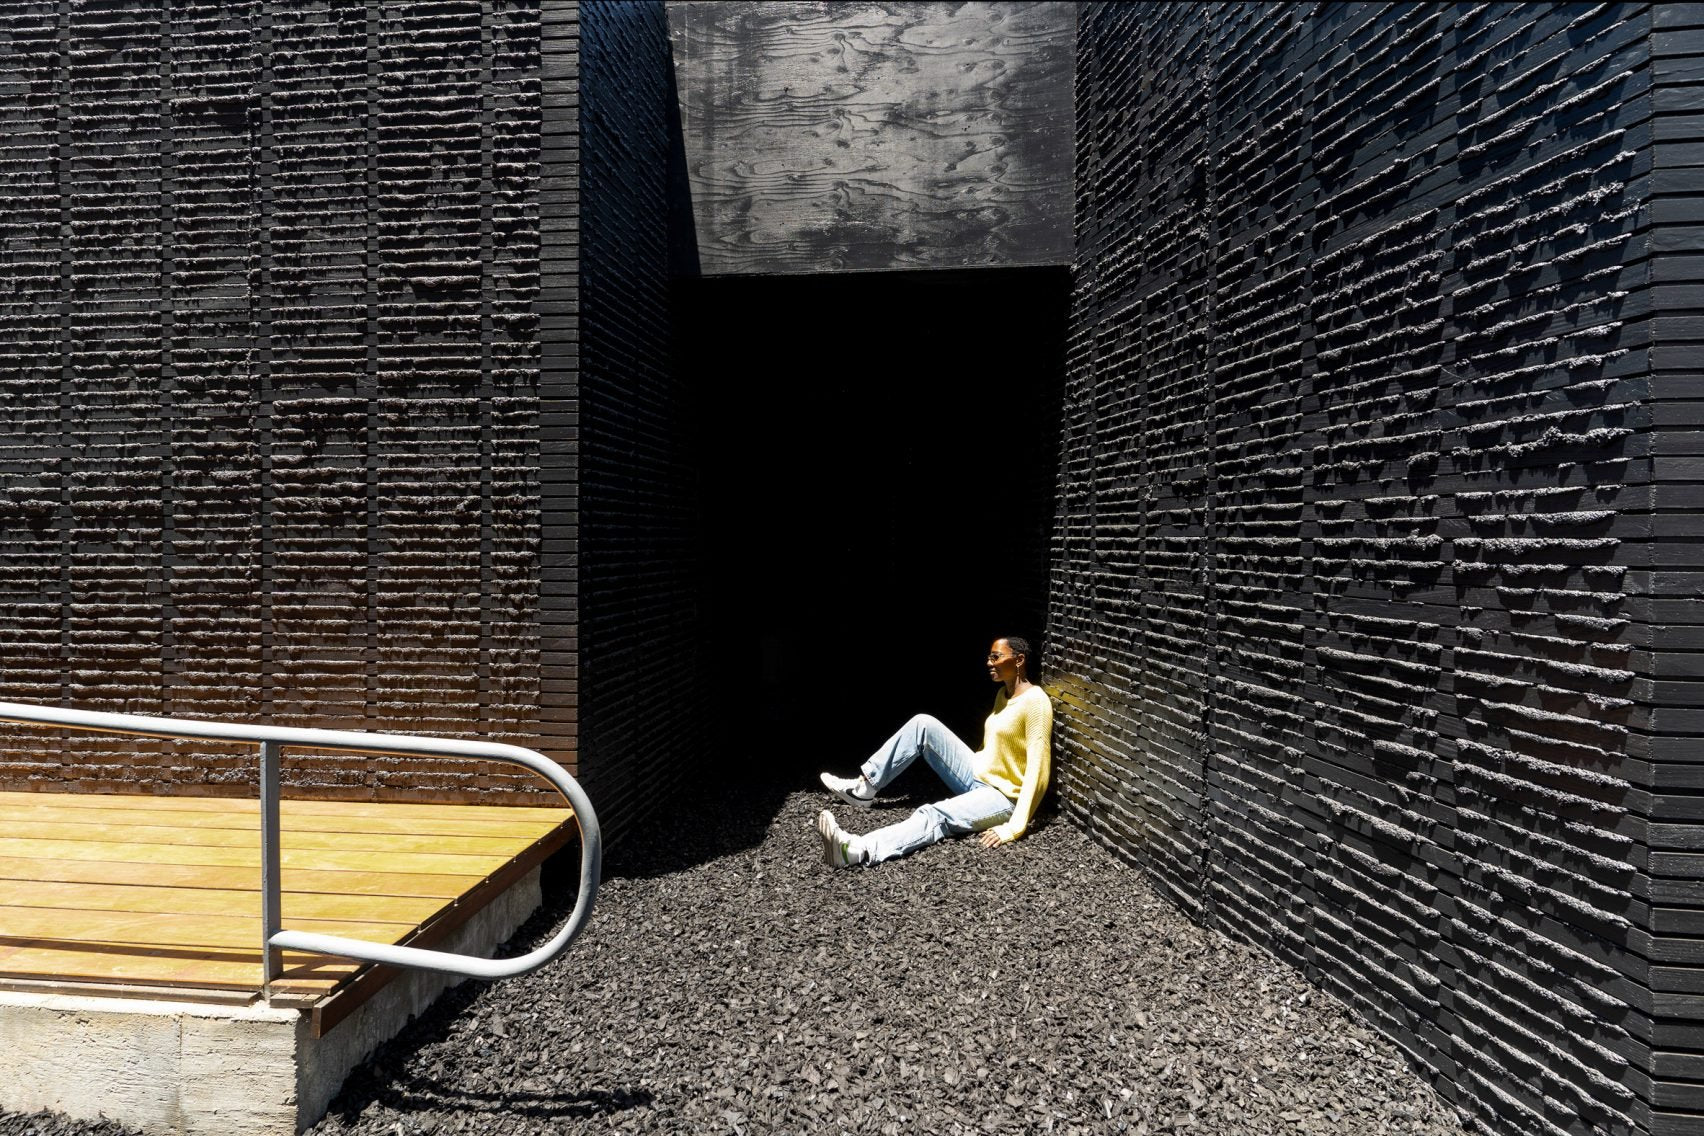 Pavilion Resembling Tar Formed to Challenge Conceptions of Blackness in Design